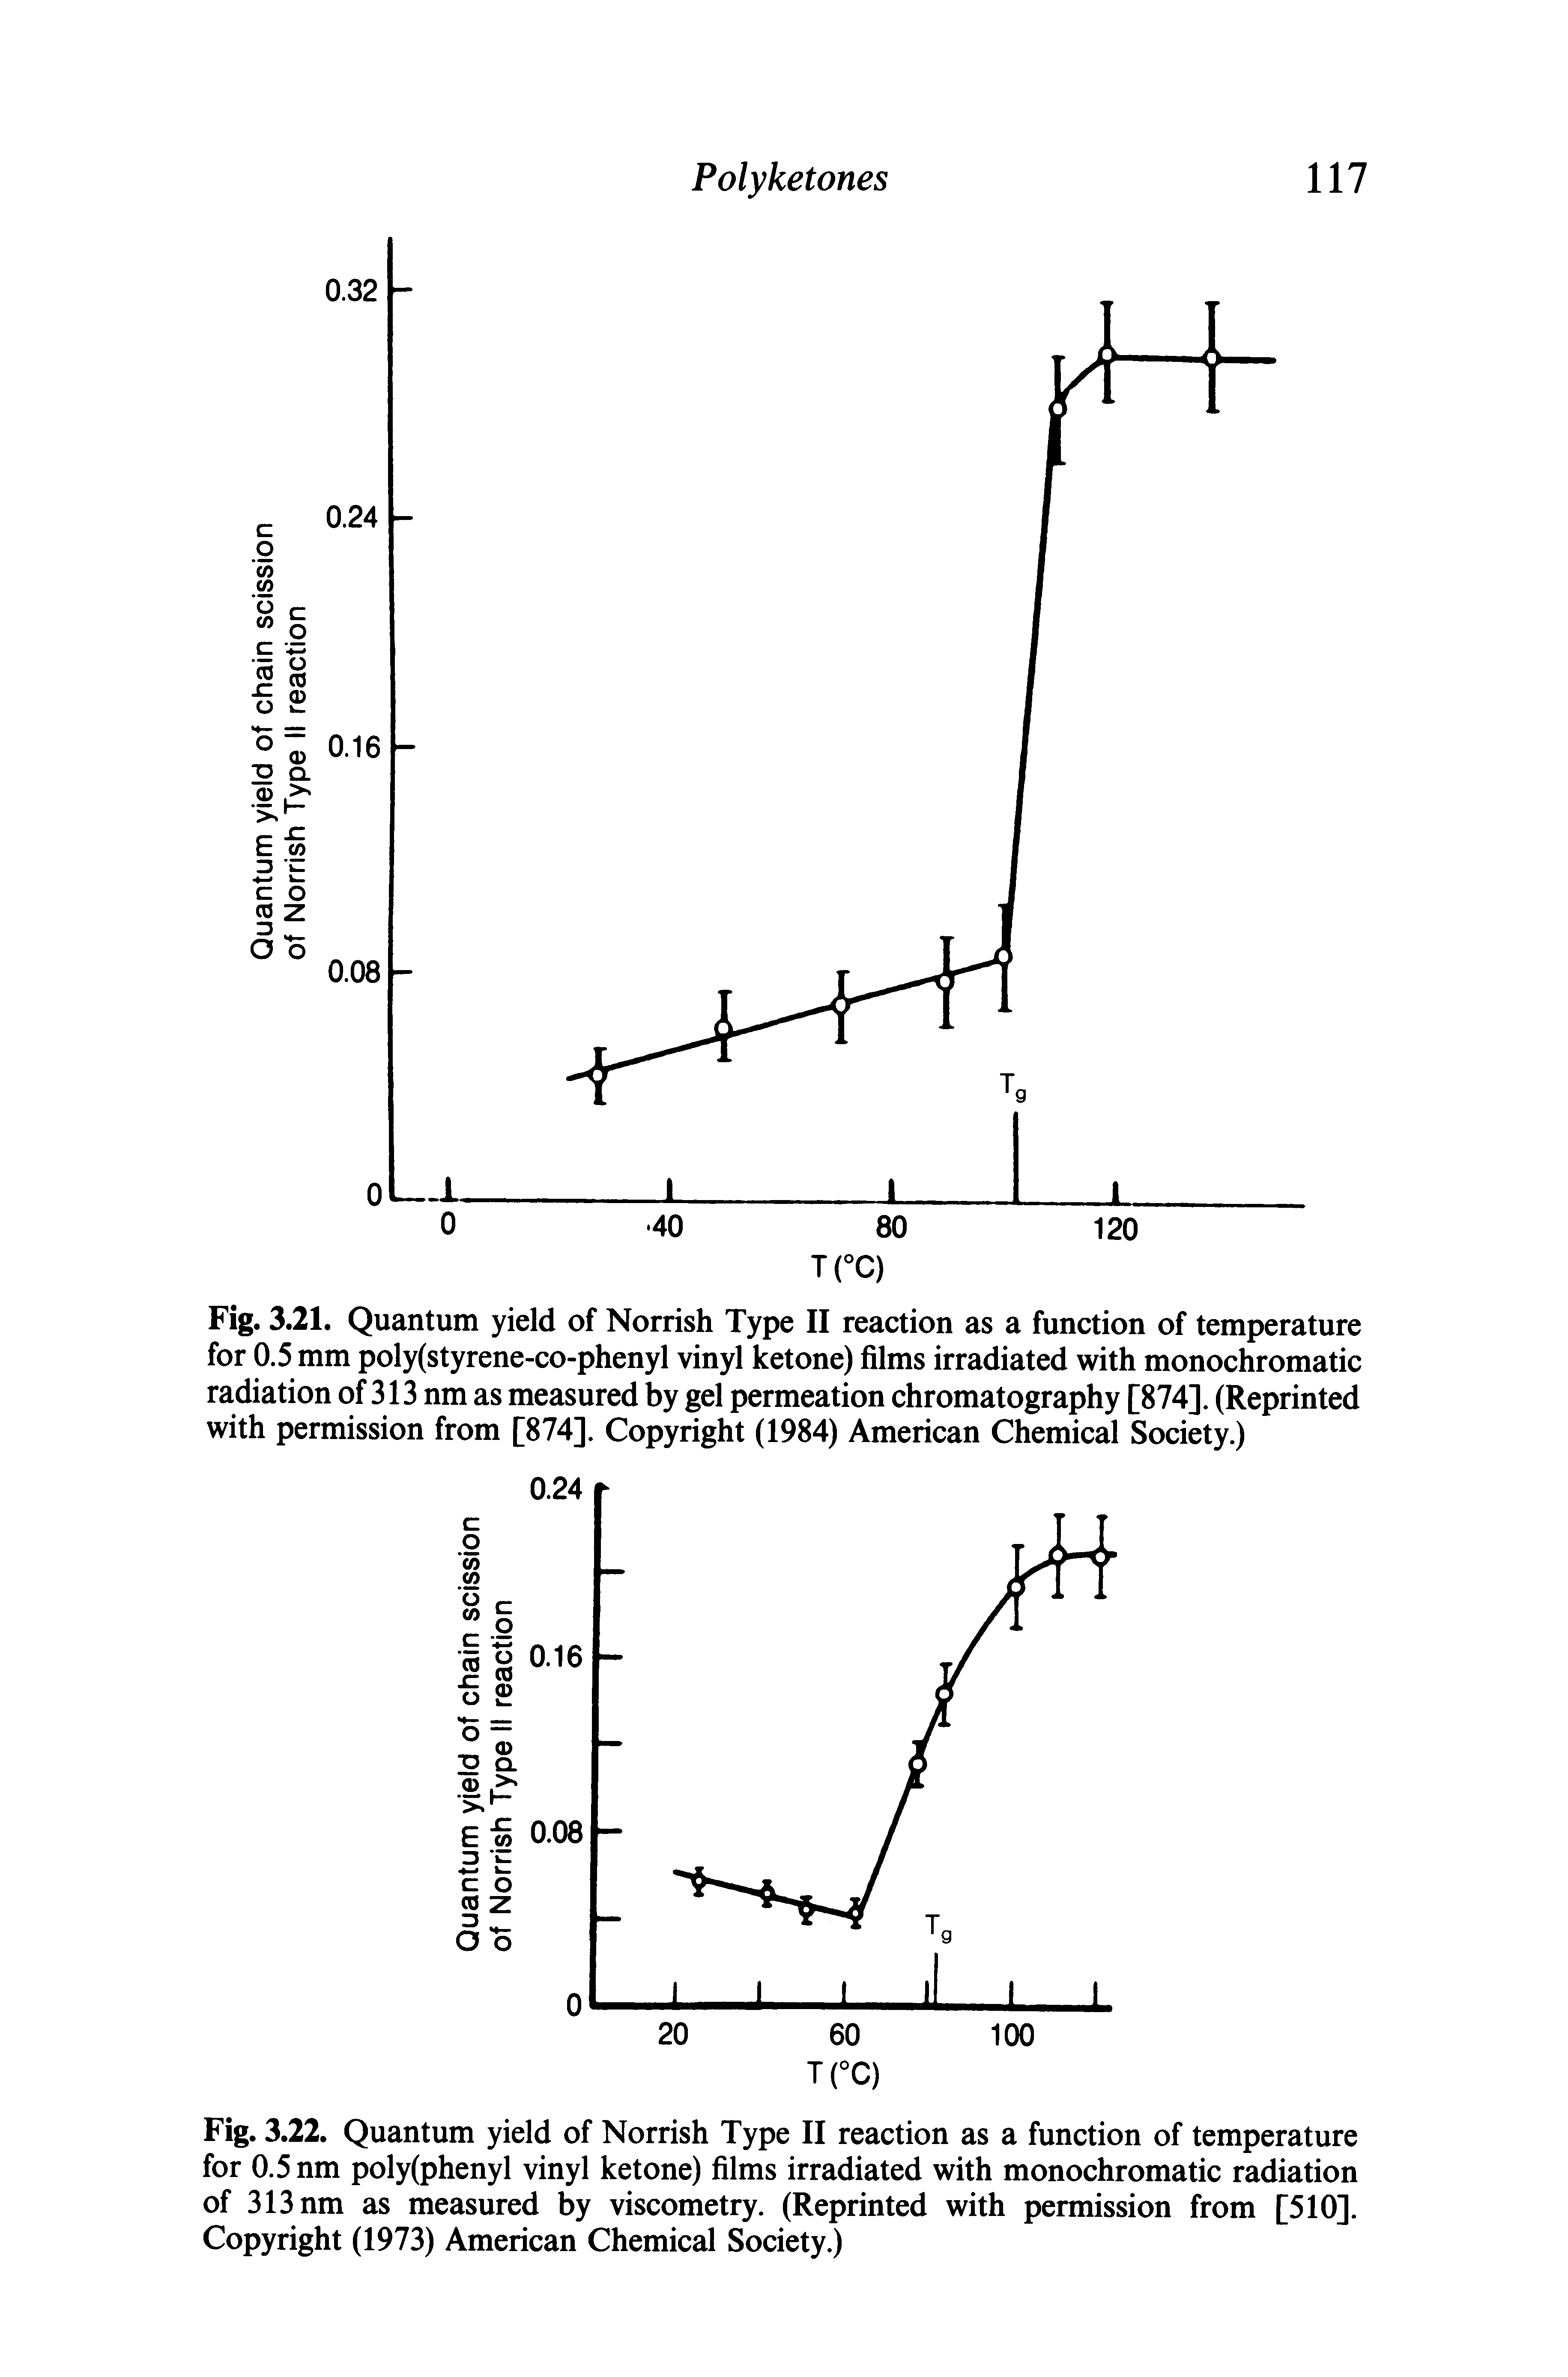 Fig. 3.21. Quantum yield of Norrish Type II reaction as a function of temperature for 0.5 mm poly(styrene-co-phenyl vinyl ketone) films irradiated with monochromatic radiation of 313 nm as measured by gel permeation chromatography [874]. (Reprinted with permission from [874]. Copyright (1984) American Chemical Society.)...